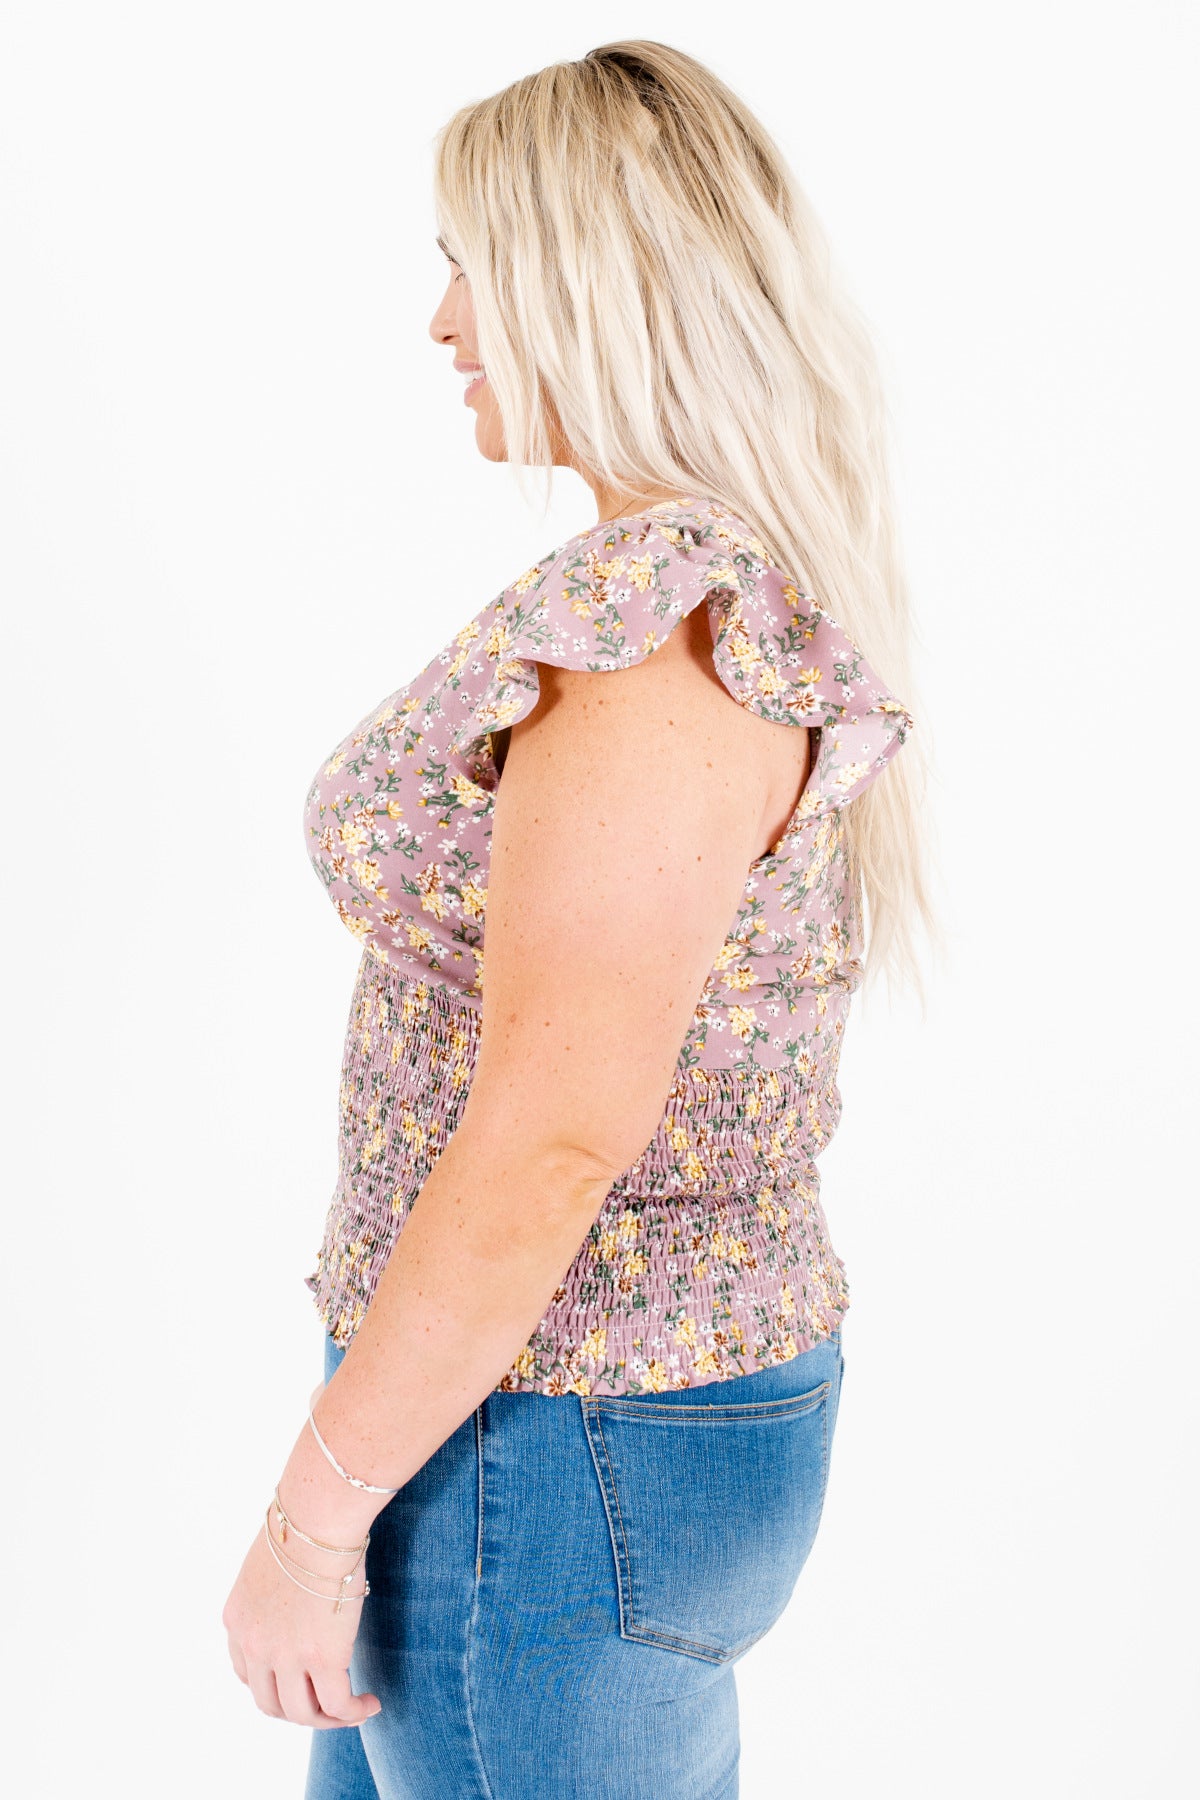 Lavender Purple Yellow Green Floral Plus Size Smocked Tops